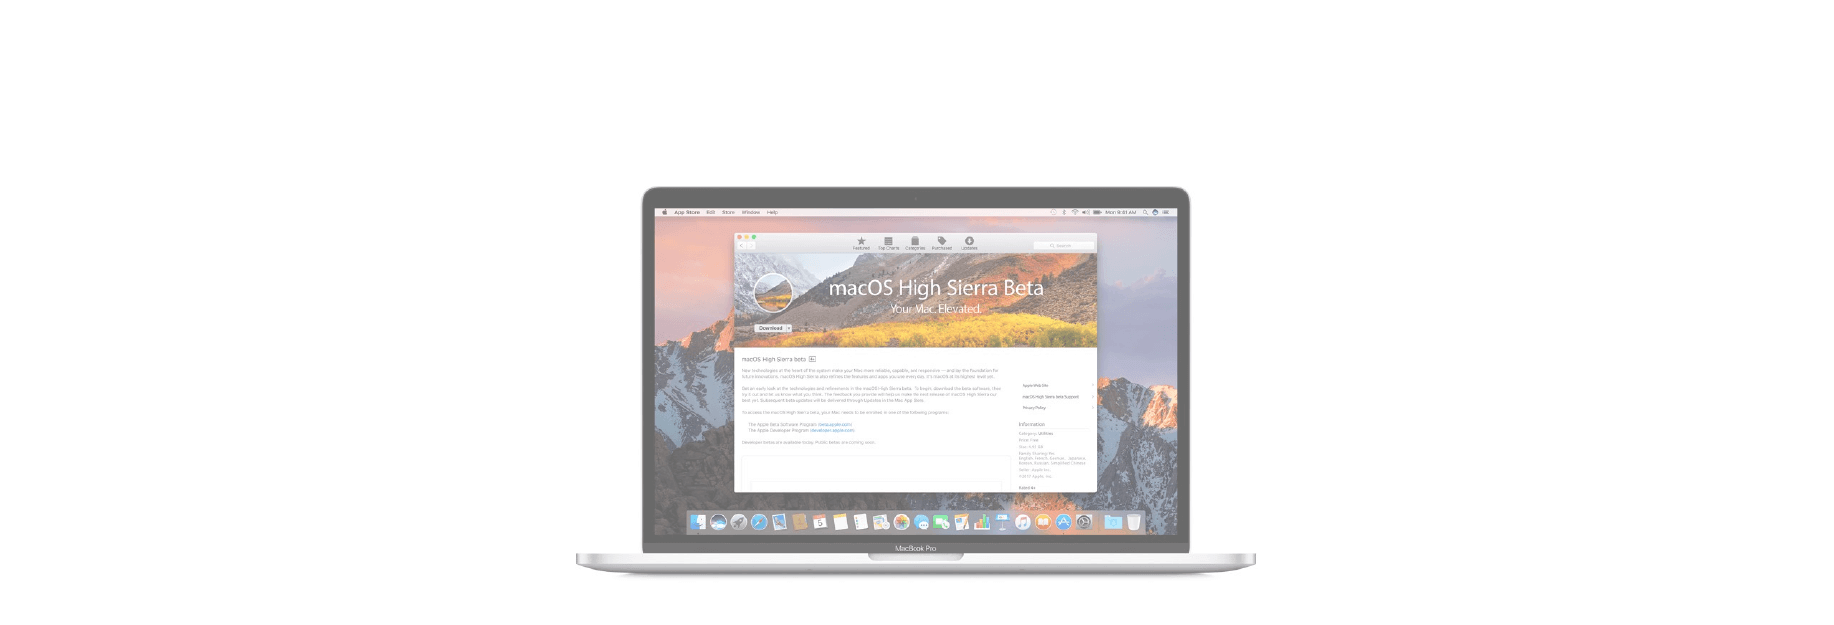 How to download macOS High Sierra 10.13.5  public beta 4 to your Mac